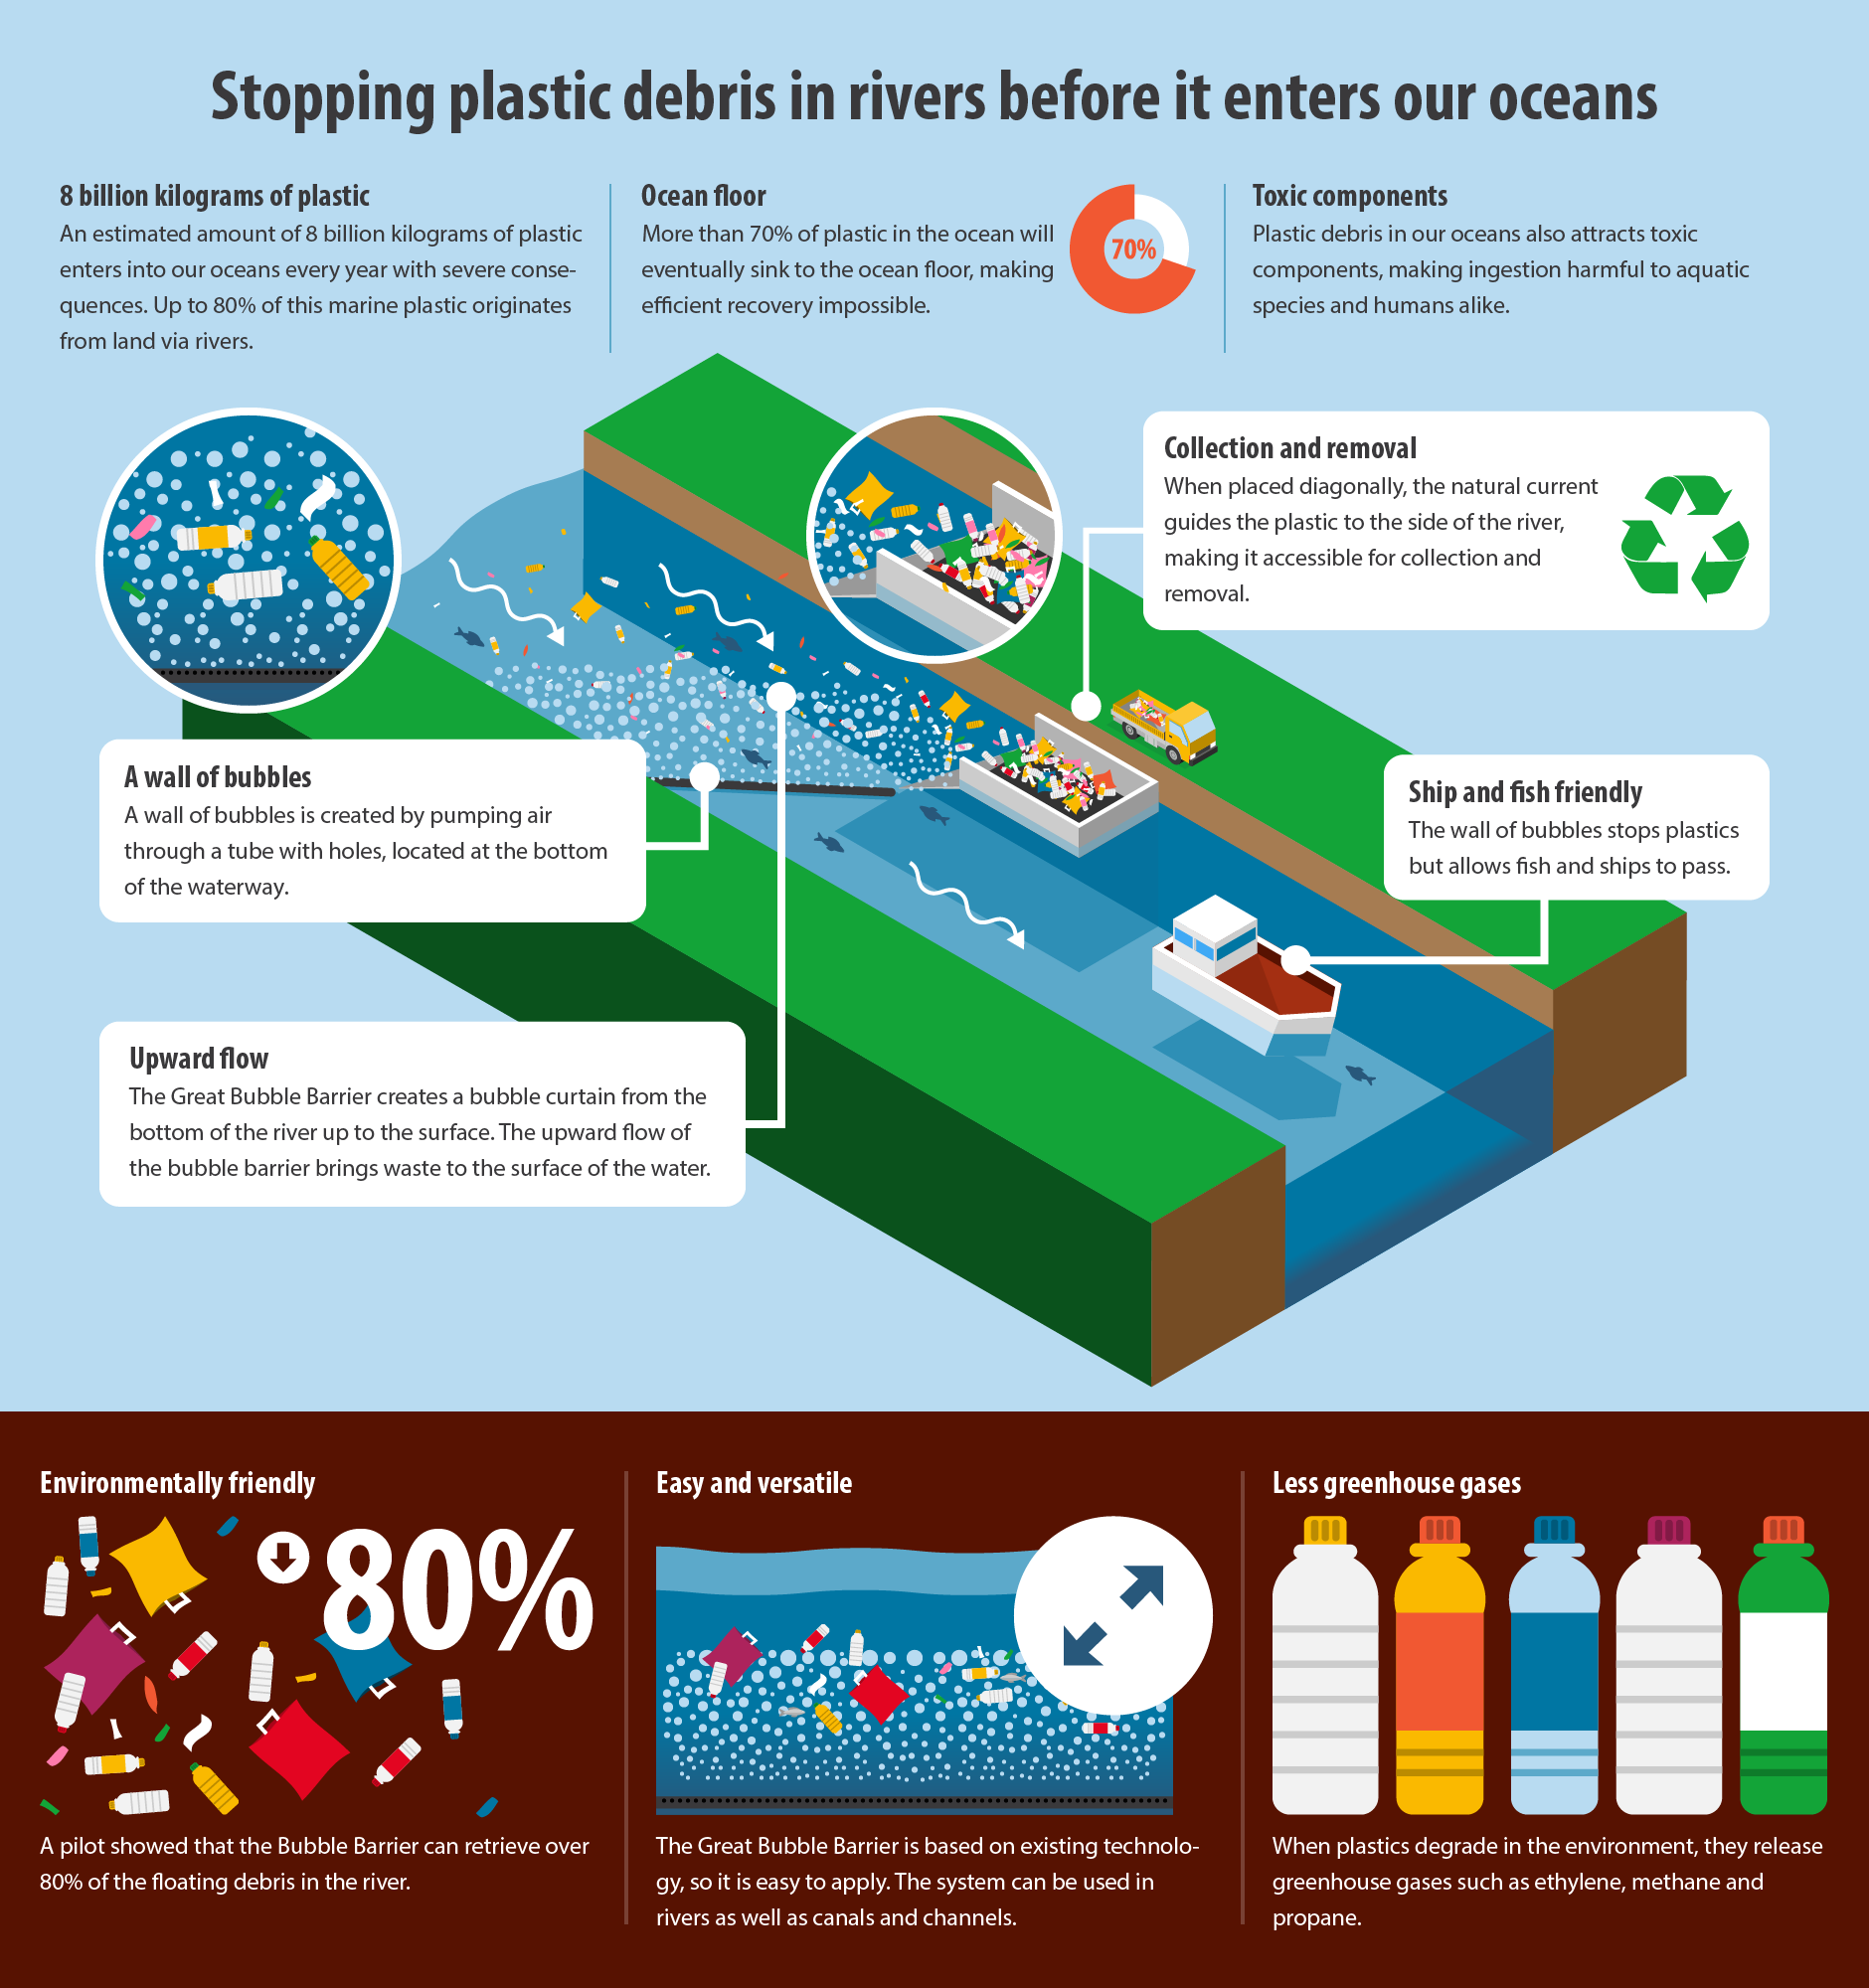 The Great Bubble Barrier has found a way to block plastics and allow passage of ships and fish. It uses a bubble barrier: a barrier made of air, which directs the waste to the side of the canal or river using the natural current and captures the plastic debris before it enters our oceans. By recovering the plastic waste early in its long “pollution career” the company minimizes its negative impact on the environment. It also recovers a valuable resource and brings it back into the plastic value chain, reducing the need for virgin plastic materials in the future and thereby reducing CO2.